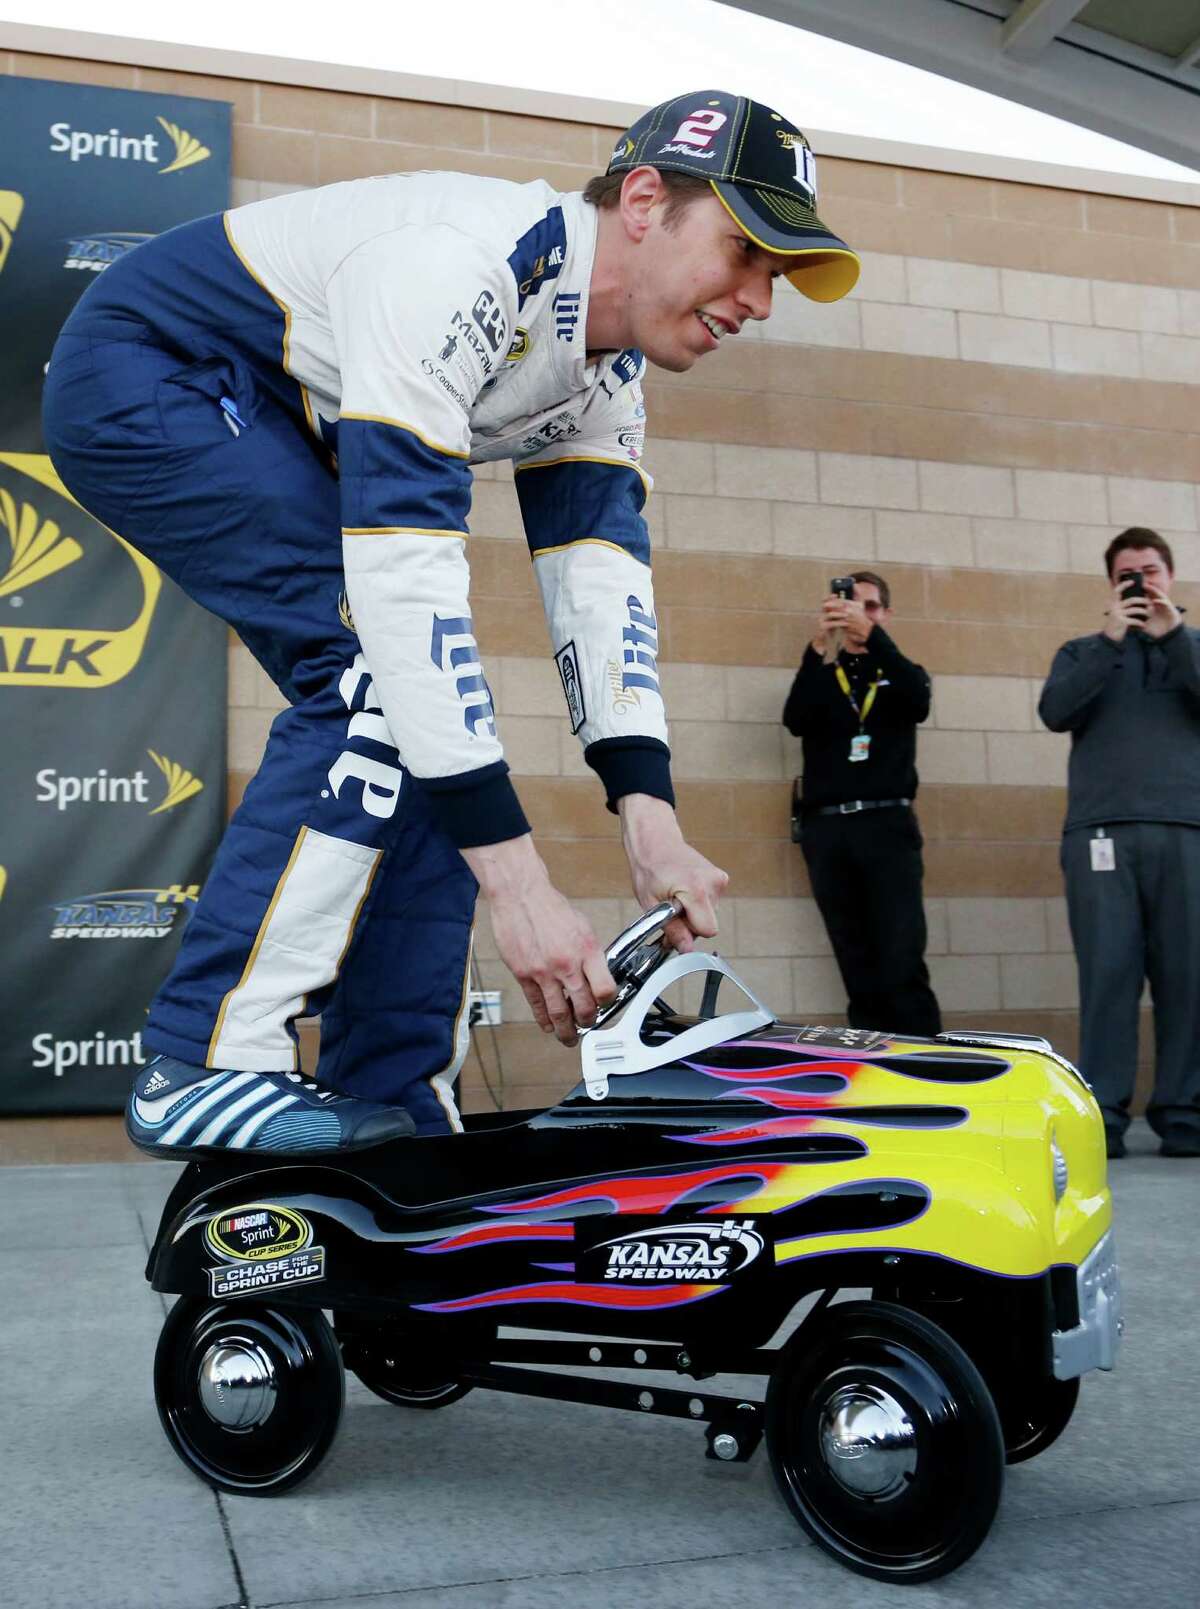 Brad Keselowski takes the pole award for a spin Friday after qualifying first for Sunday's Sprint Cup Series race at Kansas Speedway in Kansas City, Kan.